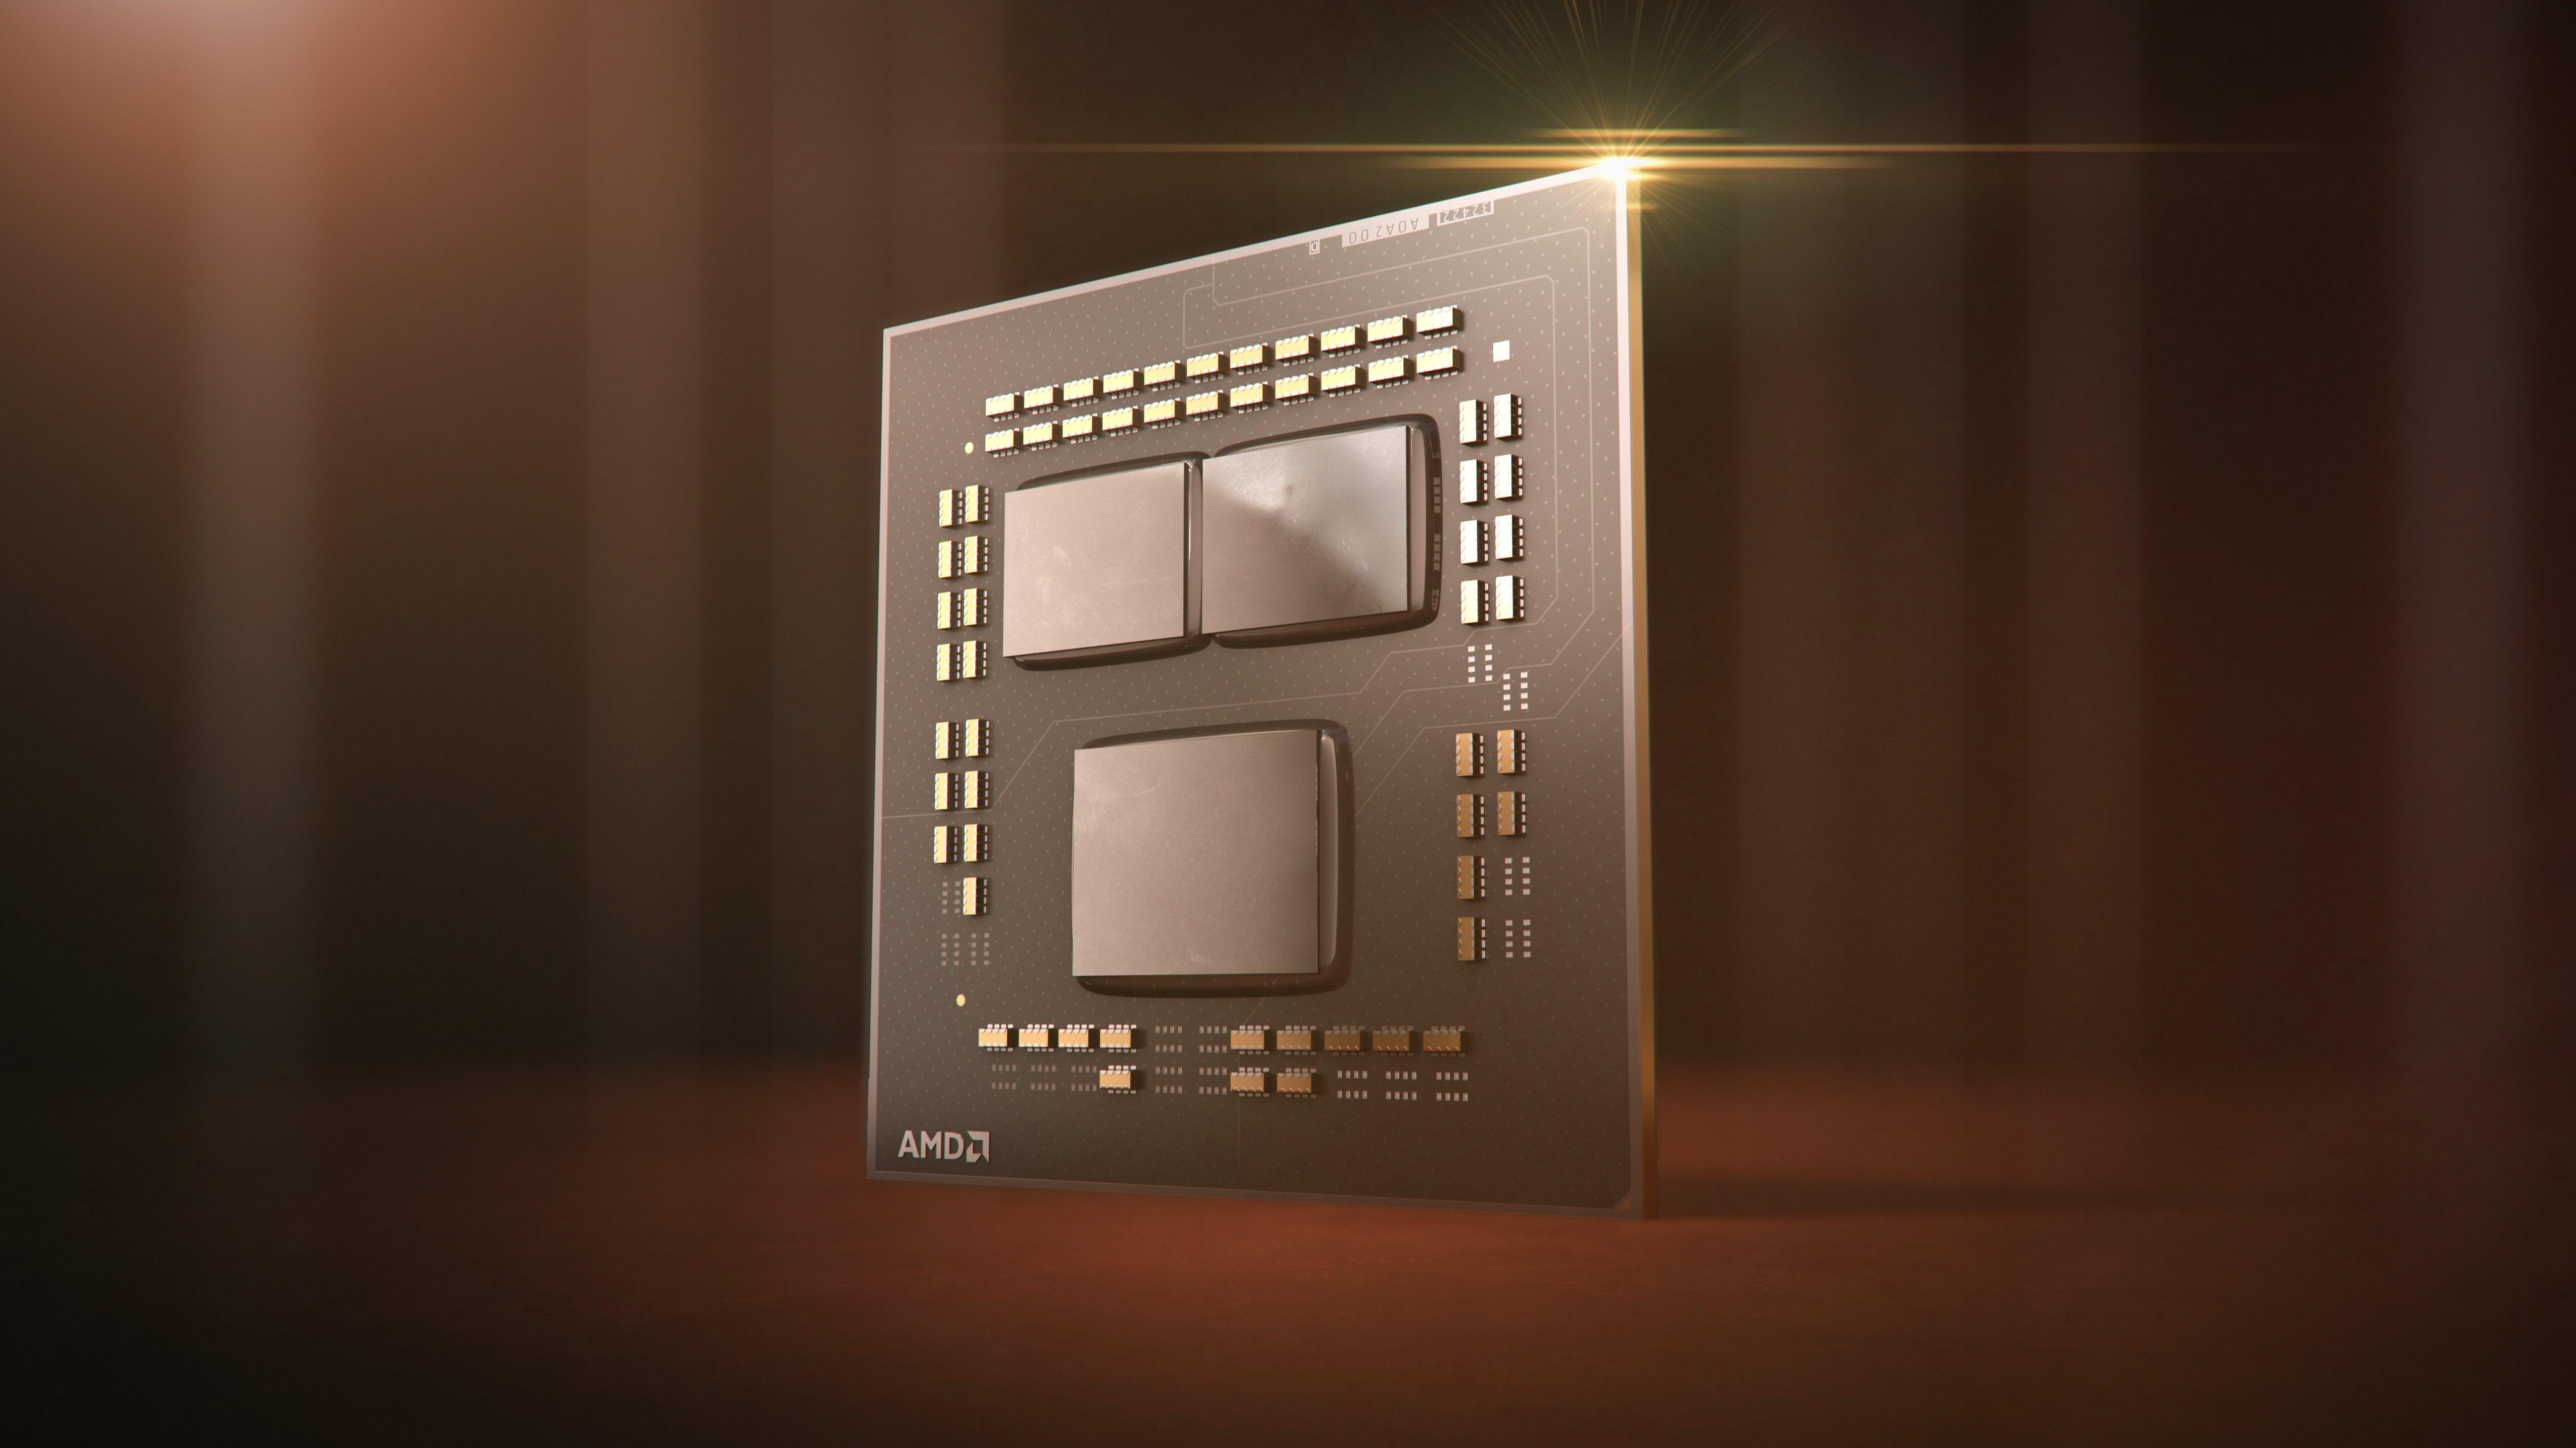 AMD Ryzen 7 5700G Processor 8-core 16 Threads up to 4.6 GHz with Radeon Graphics